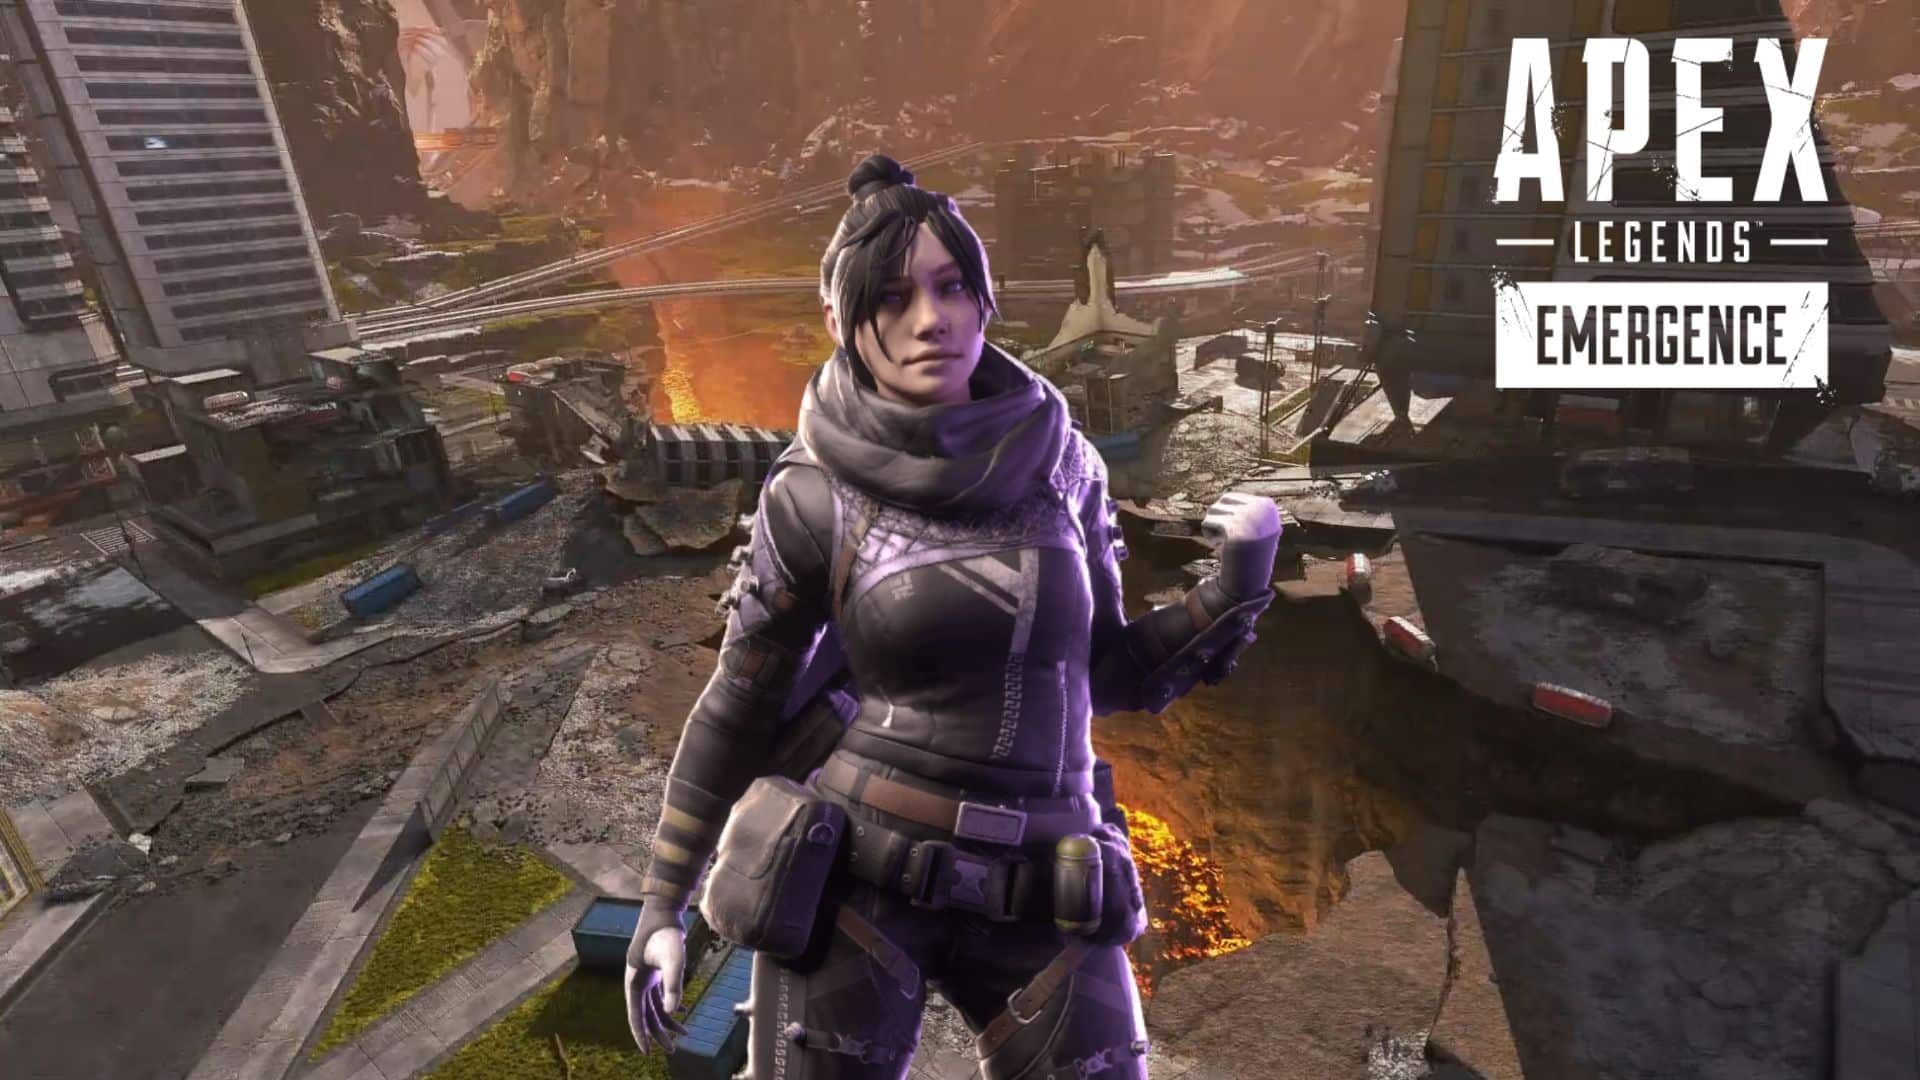 Wraith in Fragment in Apex Legends